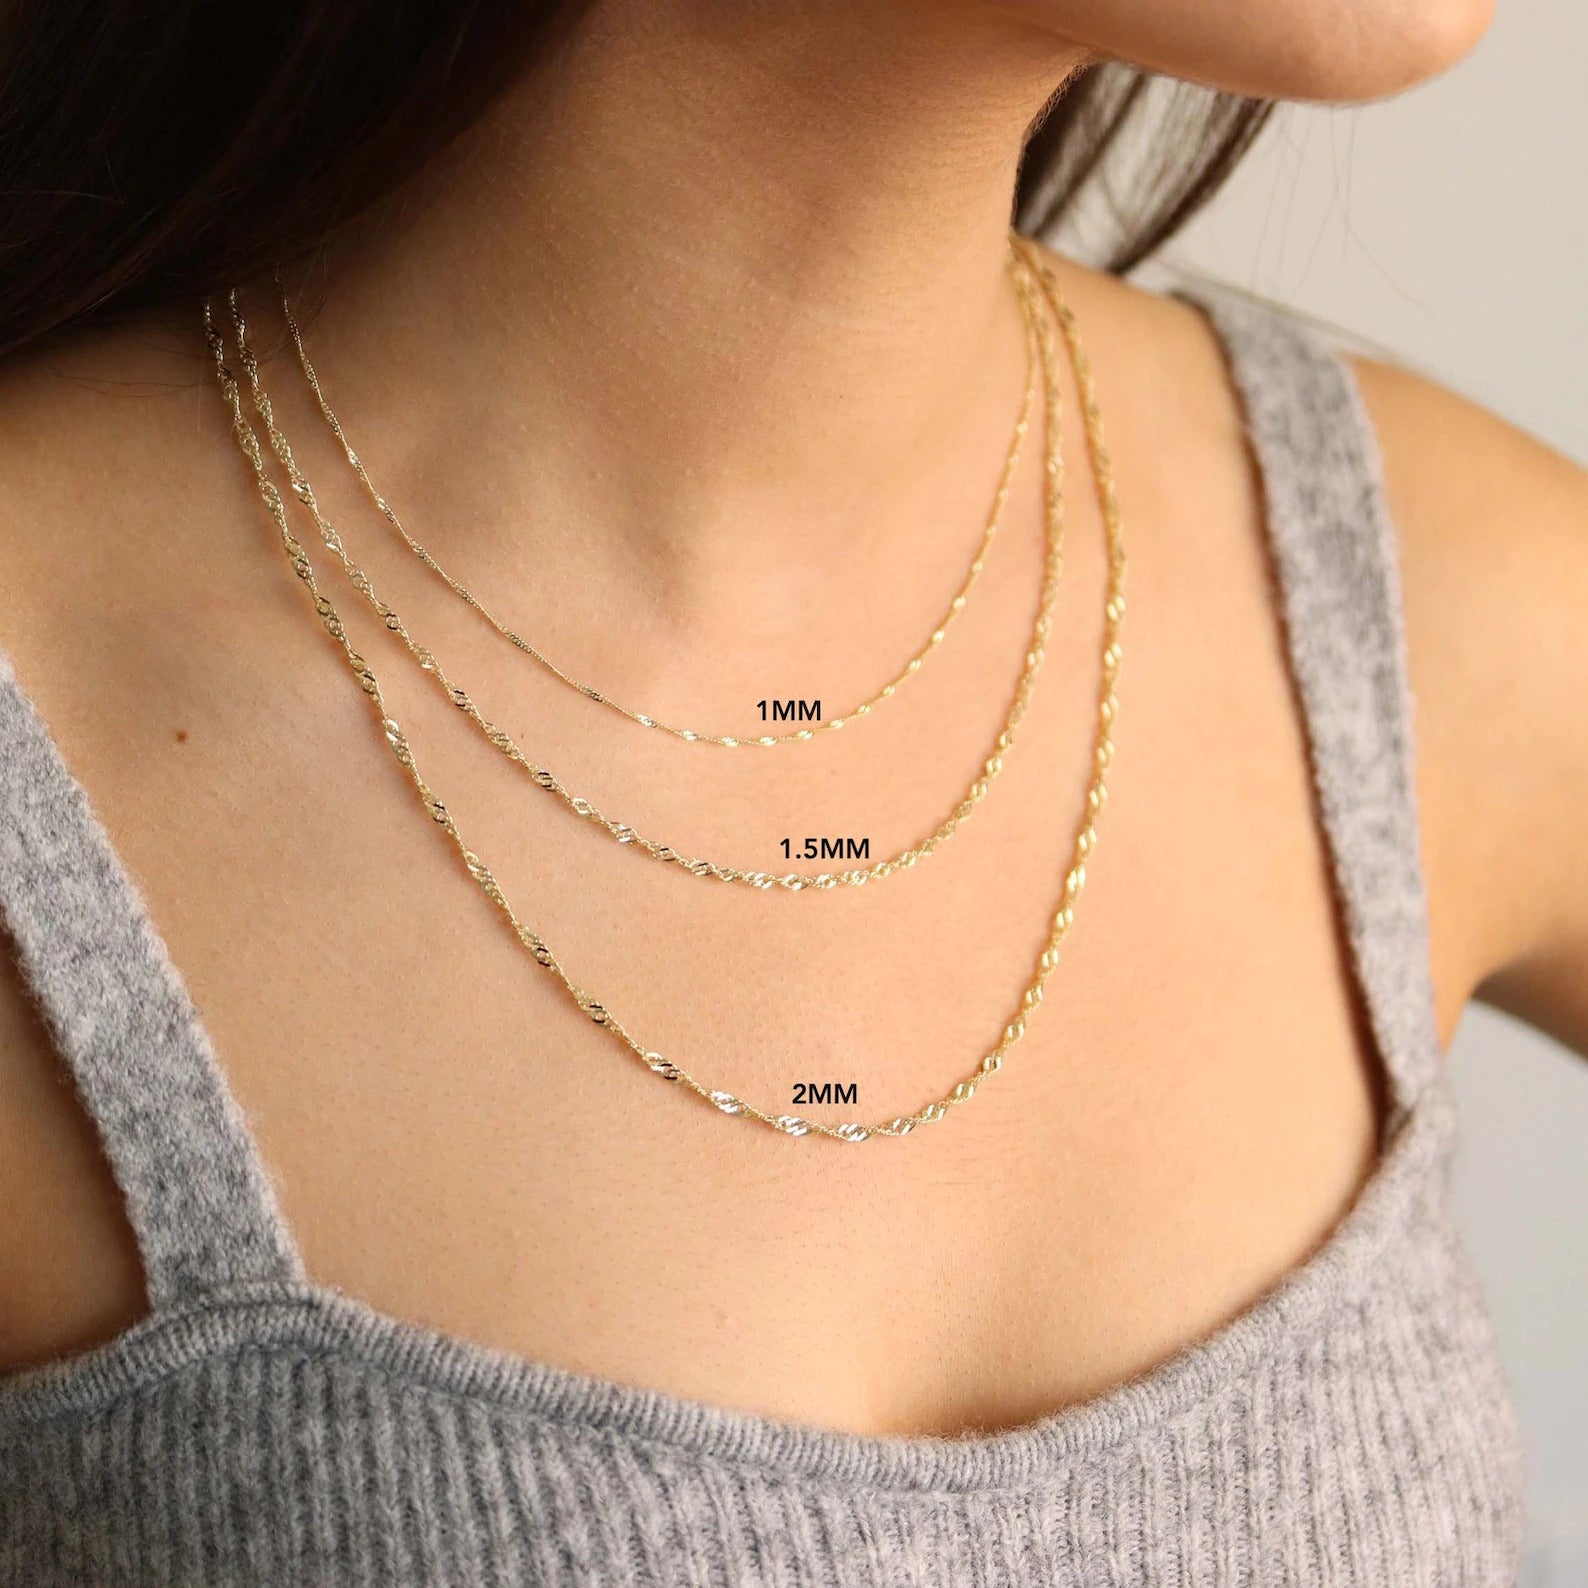 14K Yellow Gold 2mm Singapore NecklaceGold Jewelry,Mens JewelryWomens Jewelry,Fine Jewelry,Fashion Jewelry14K Gold Jewelry,Jewelry GiftsHoliday Gifts,Mothers Day Gifts,Fathers Day Gifts,Gifts for MomGifts for Dad,Gifts for Her,Gifts for Him,Fancy Jewelry